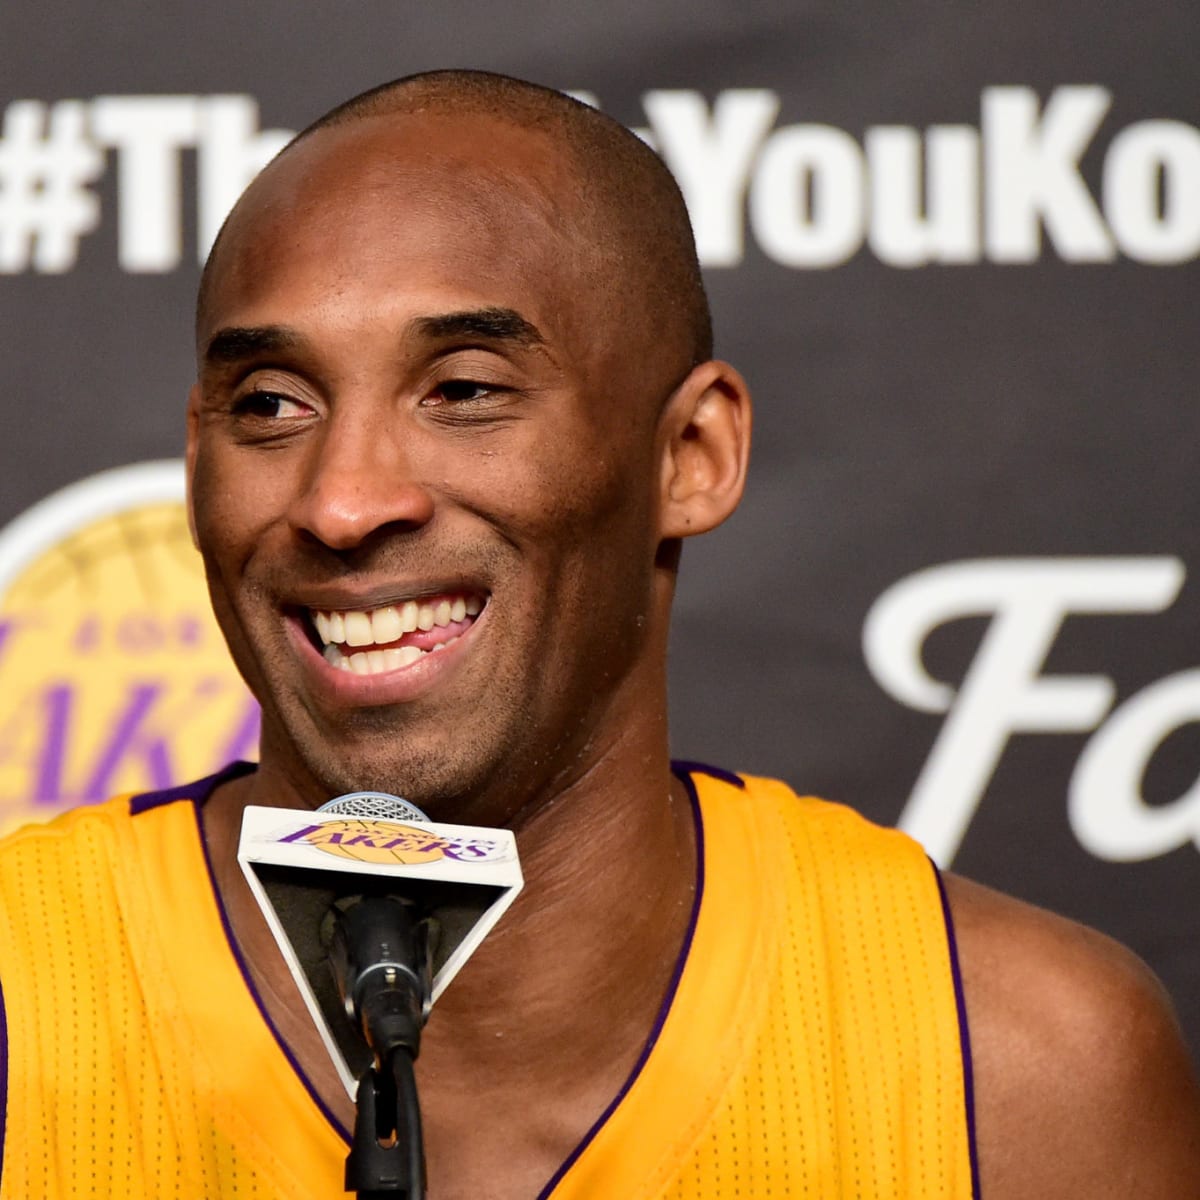 How did Kobe Bryant react to the Eagles winning Super Bowl LII?